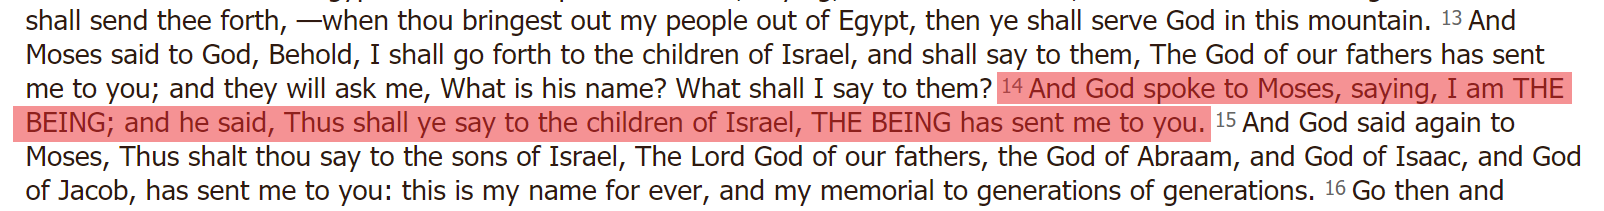 Screenshot of the Septuagint, translated approximately from 300B.C. - 200B.C..